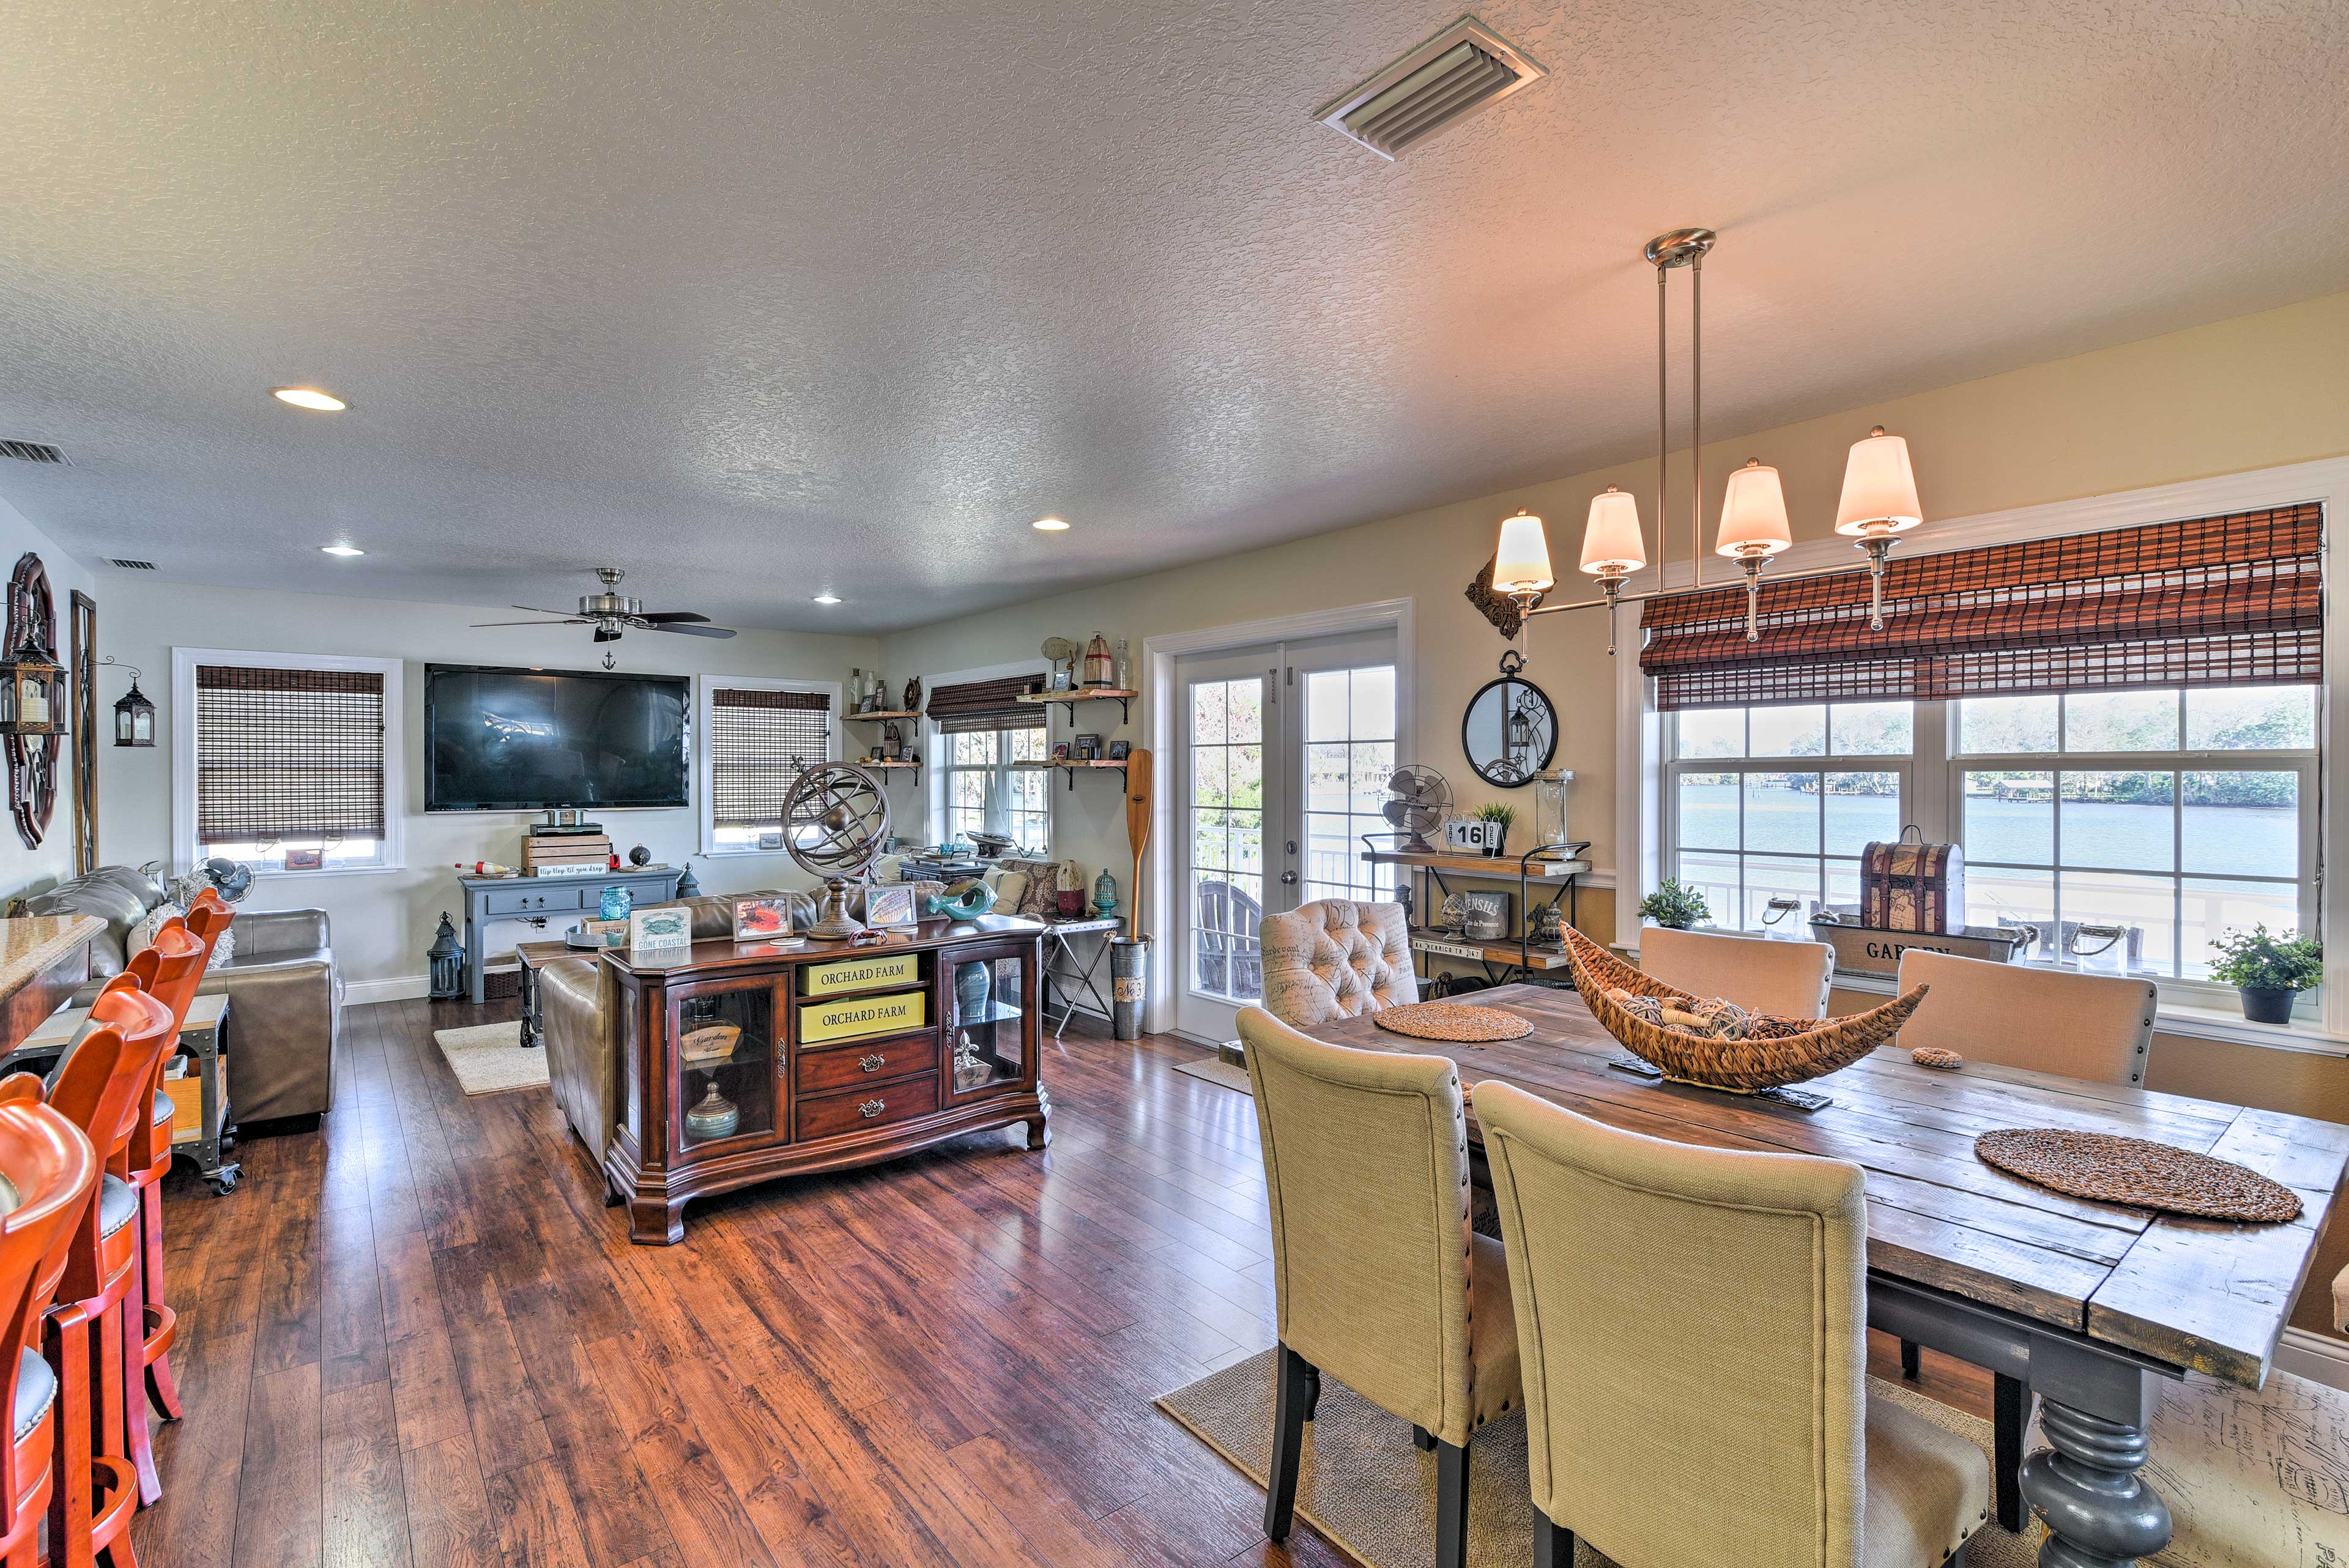 The open floor plan gives the home a spacious feel.